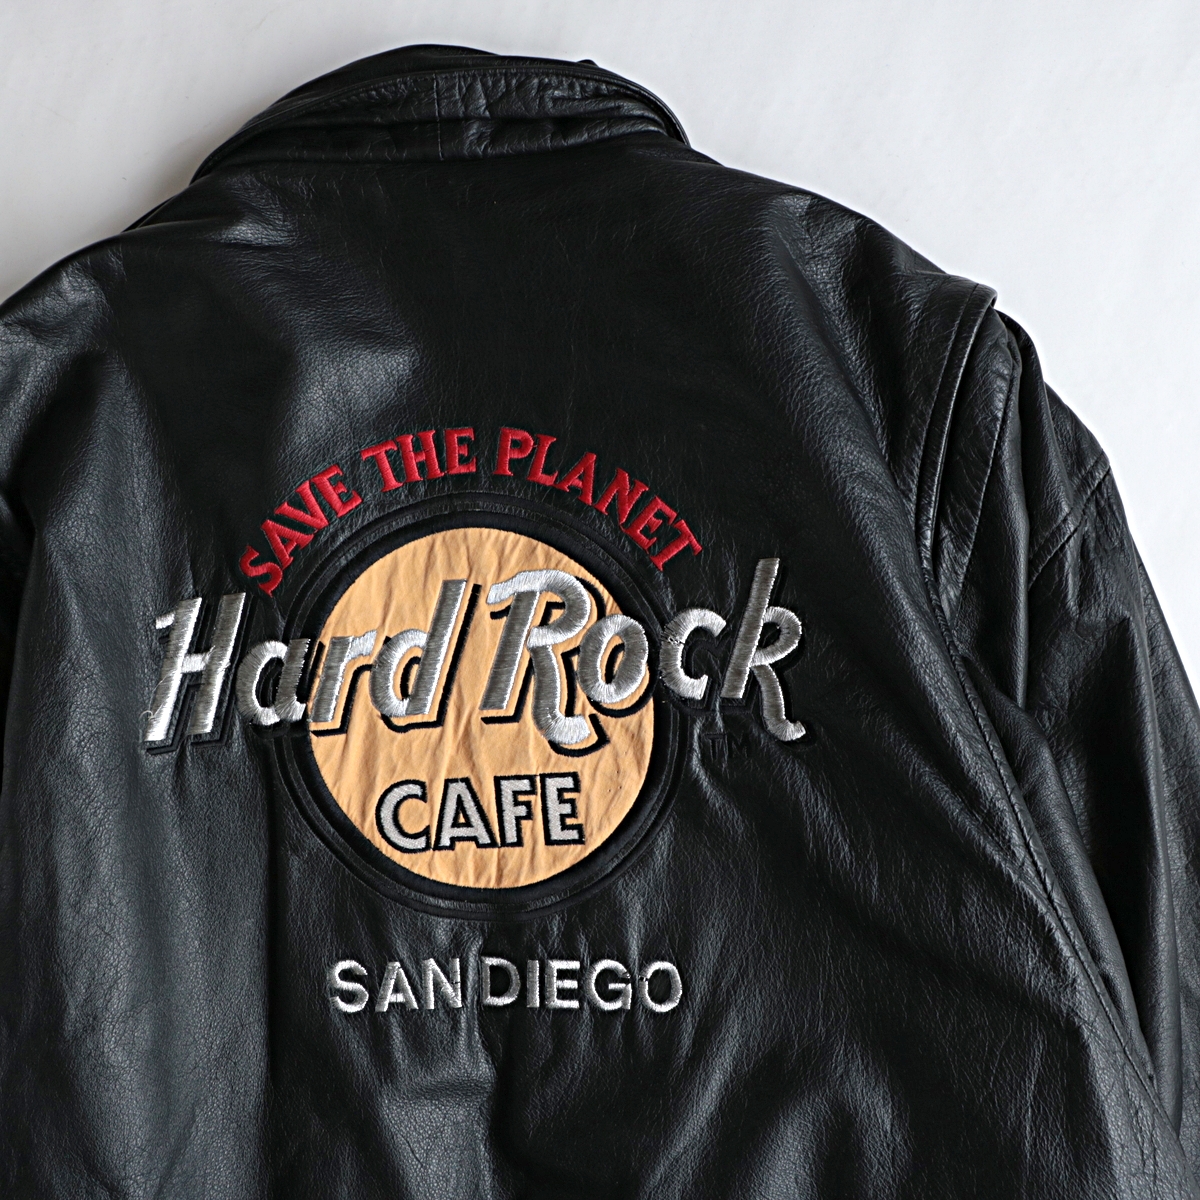 hard rock cafe ハードロックカフェ ”save the planet” A2 フライト 